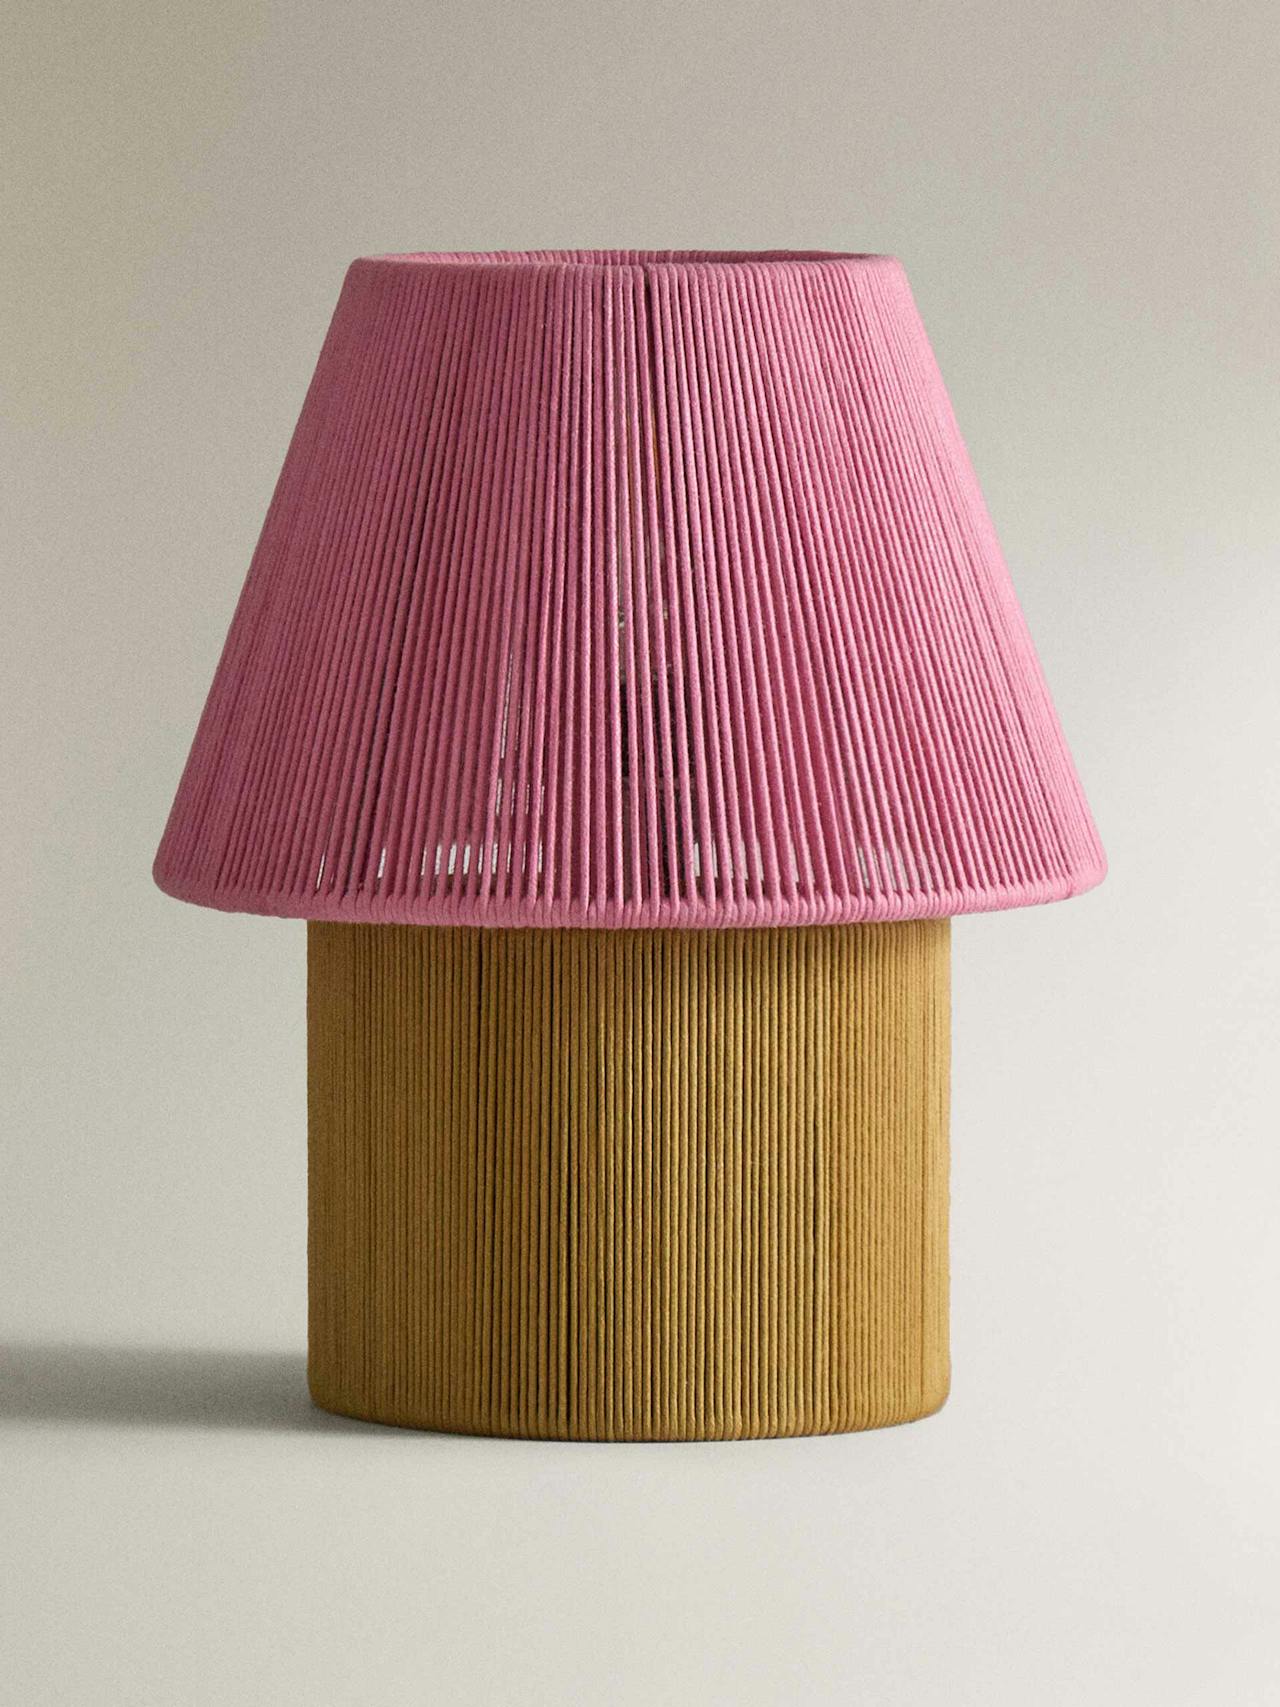 Table lamp with cord shade